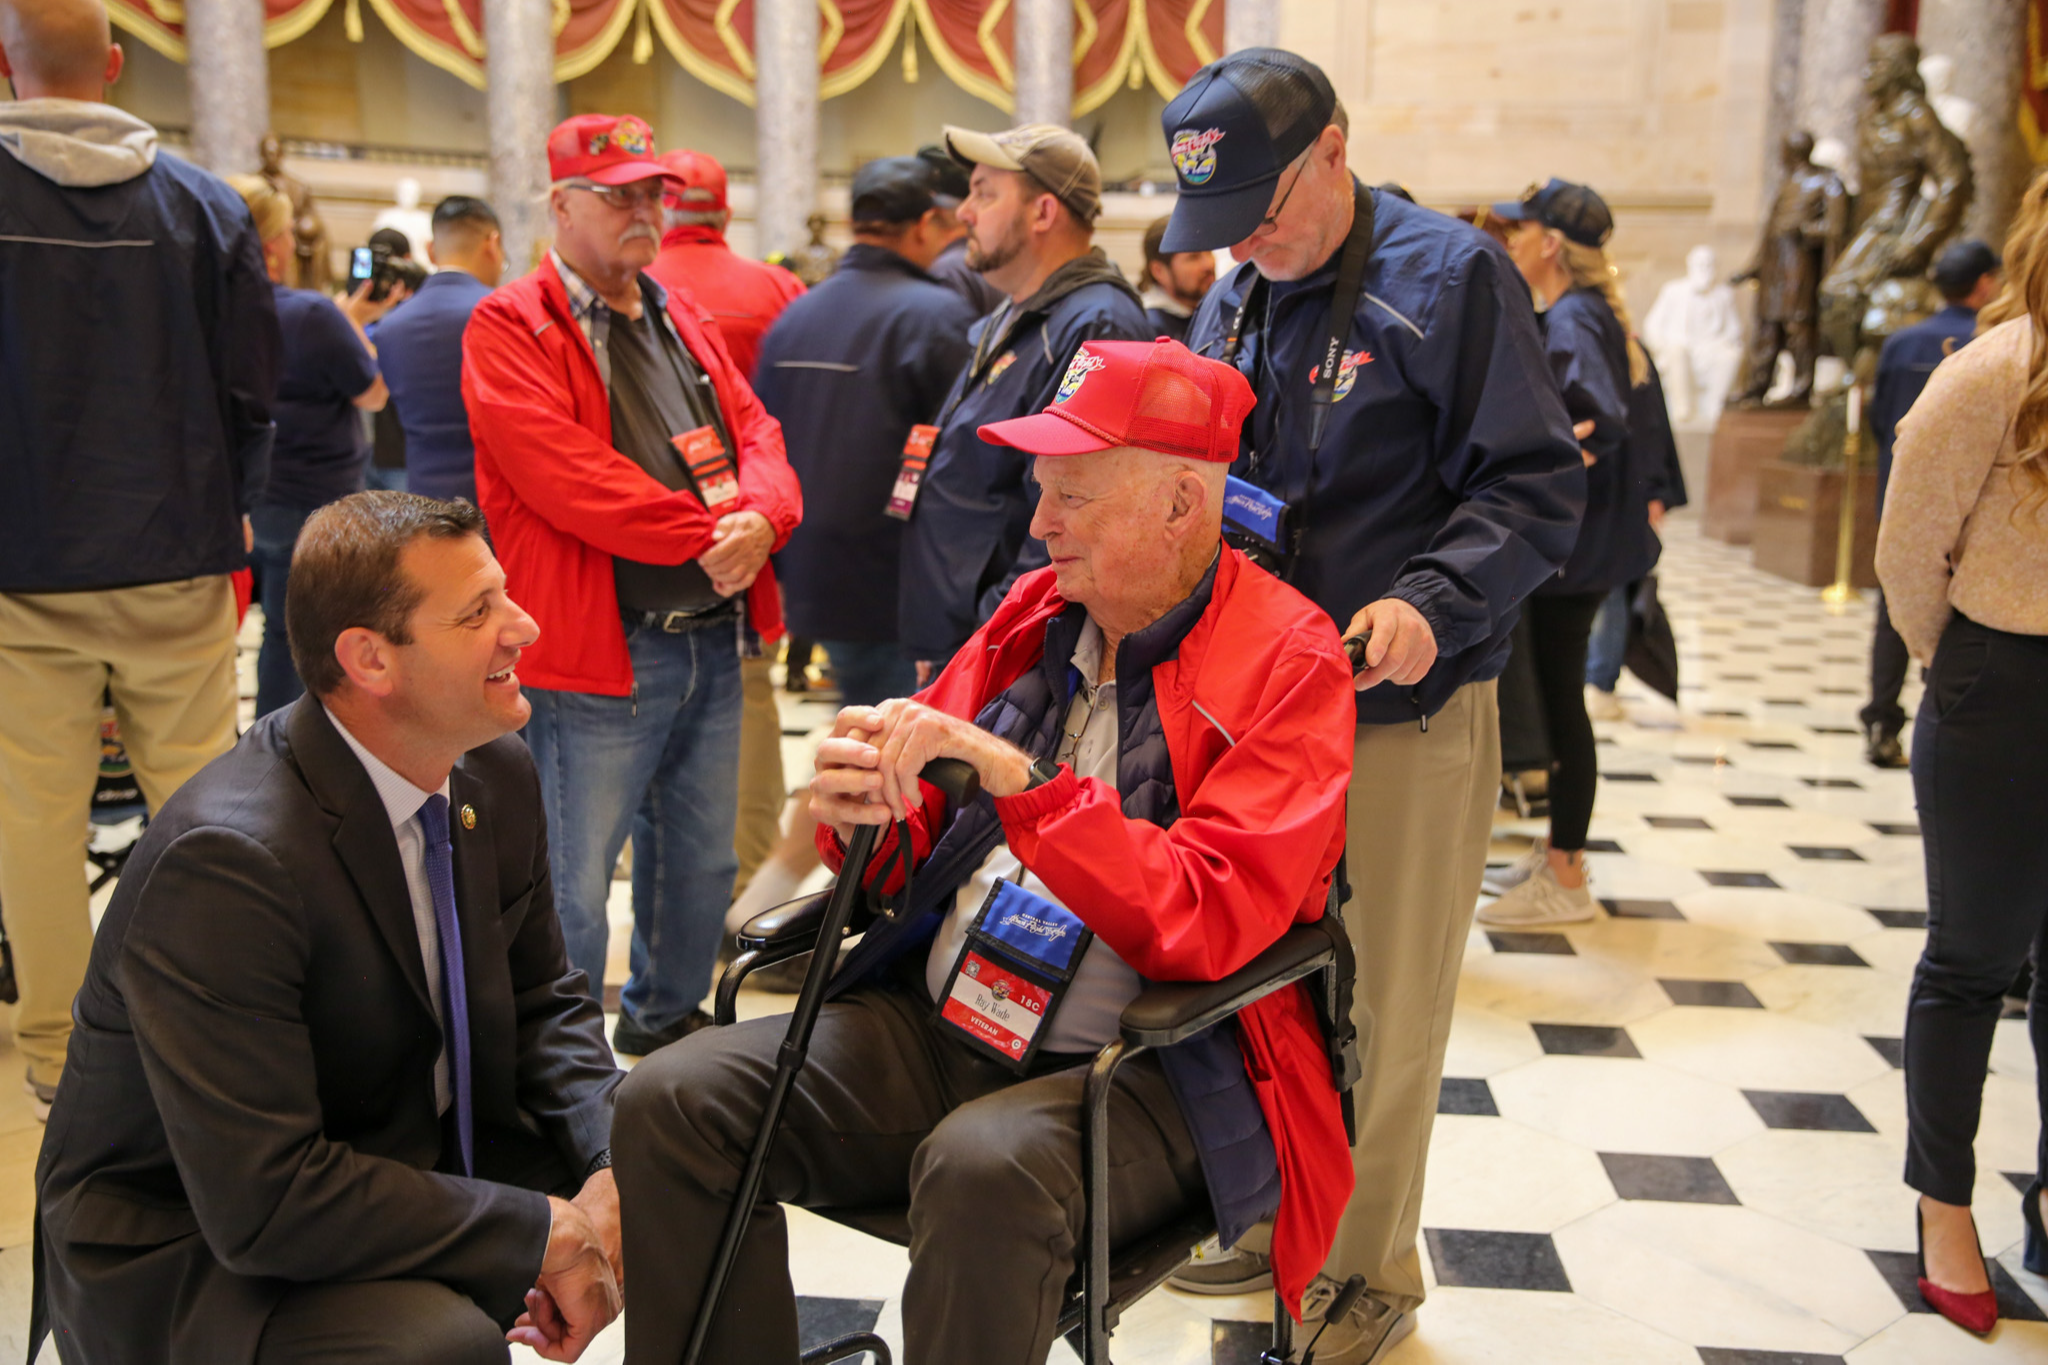 Rep. Valadao welcomes Central Valley Honor Flight to the U.S. Capitol